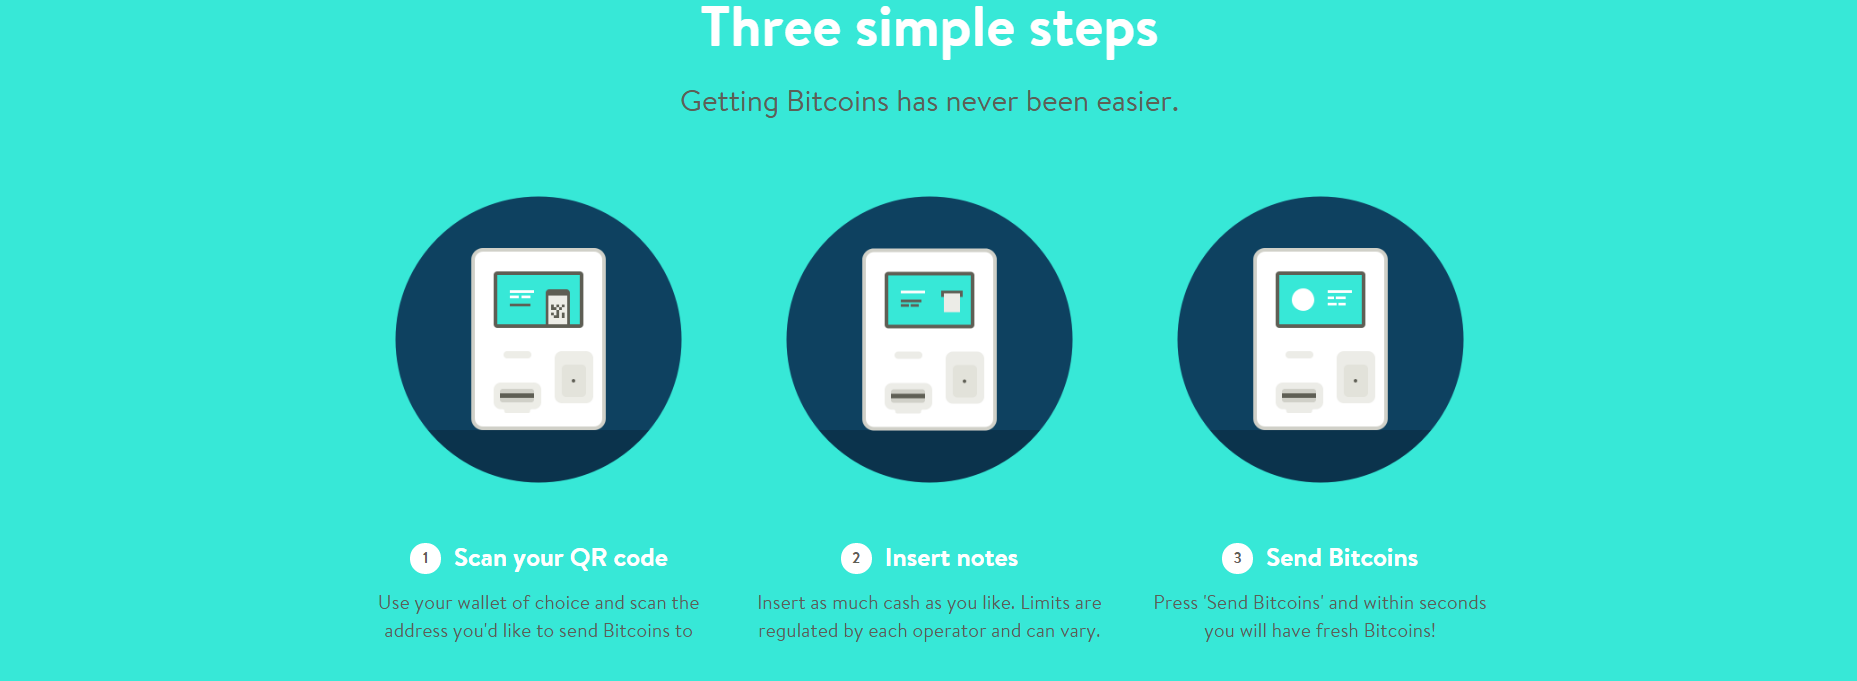 Turn Your Crypto To Cash At Any Bitcoin Atm With The Secure Wallet - 